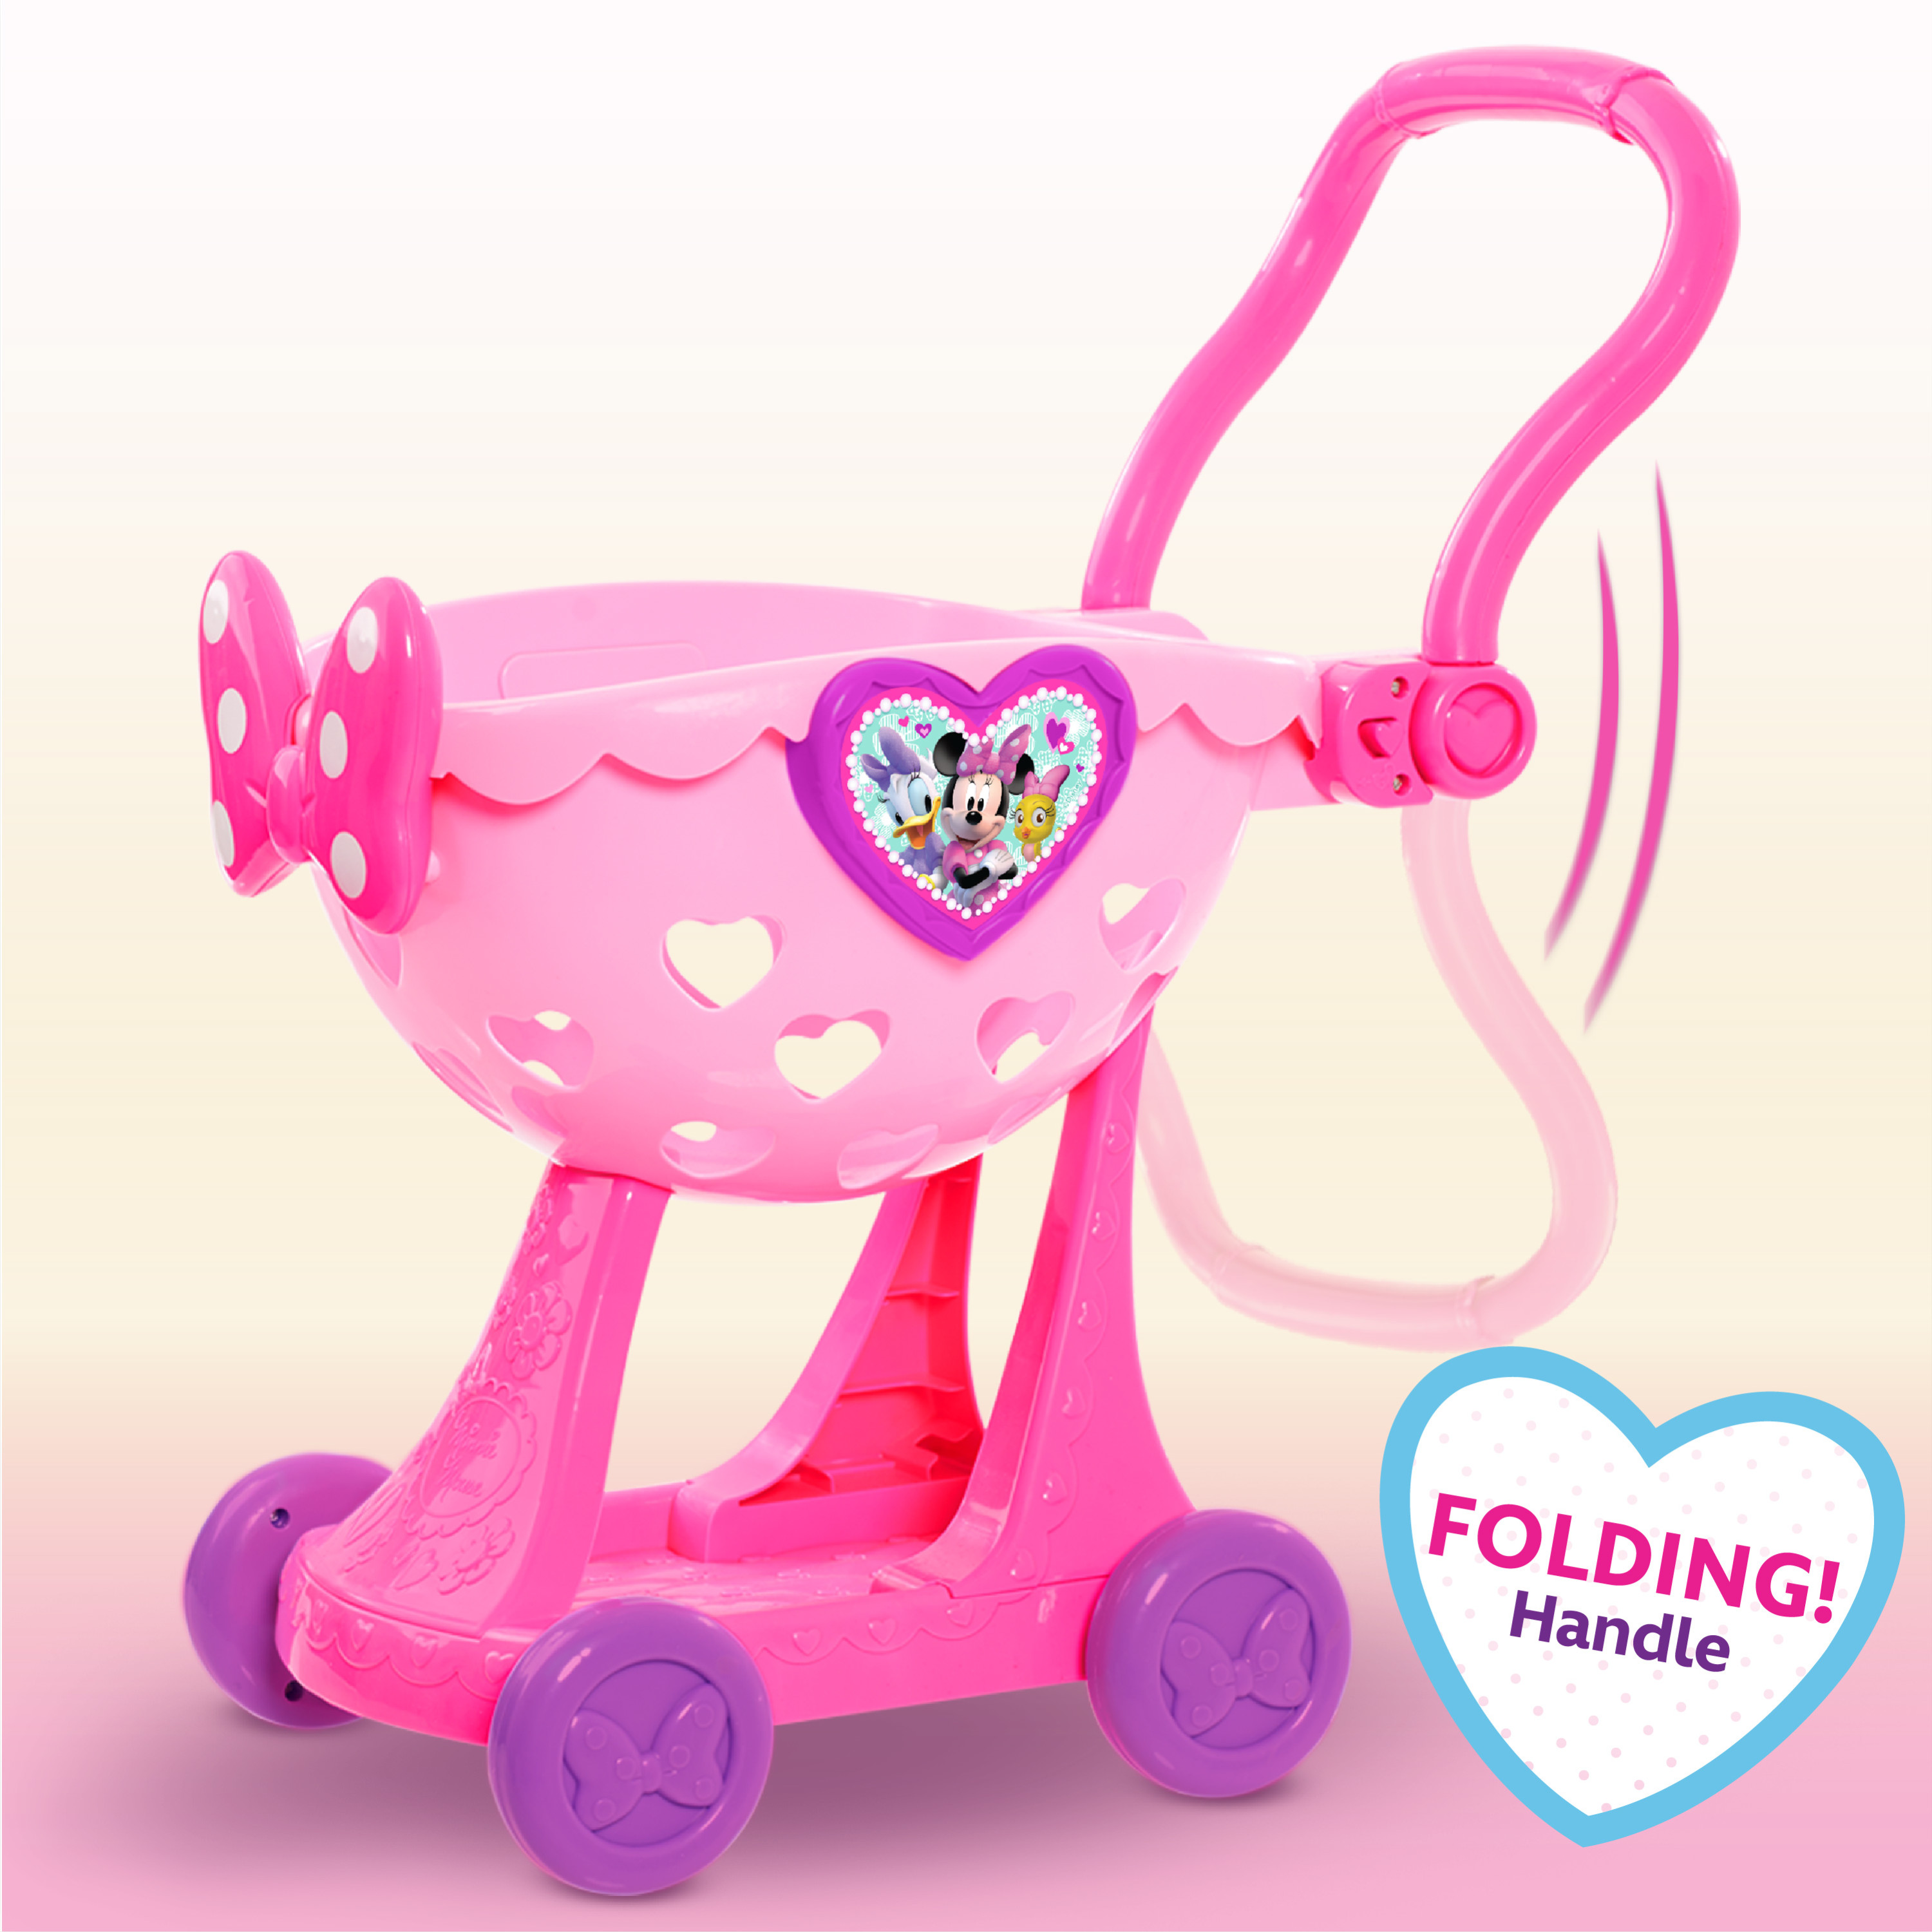 Minnie's Happy Helpers Bowtique Shopping Cart, Dress Up and Pretend Play, Officially Licensed Kids Toys for Ages 3 Up, Gifts and Presents - image 4 of 9